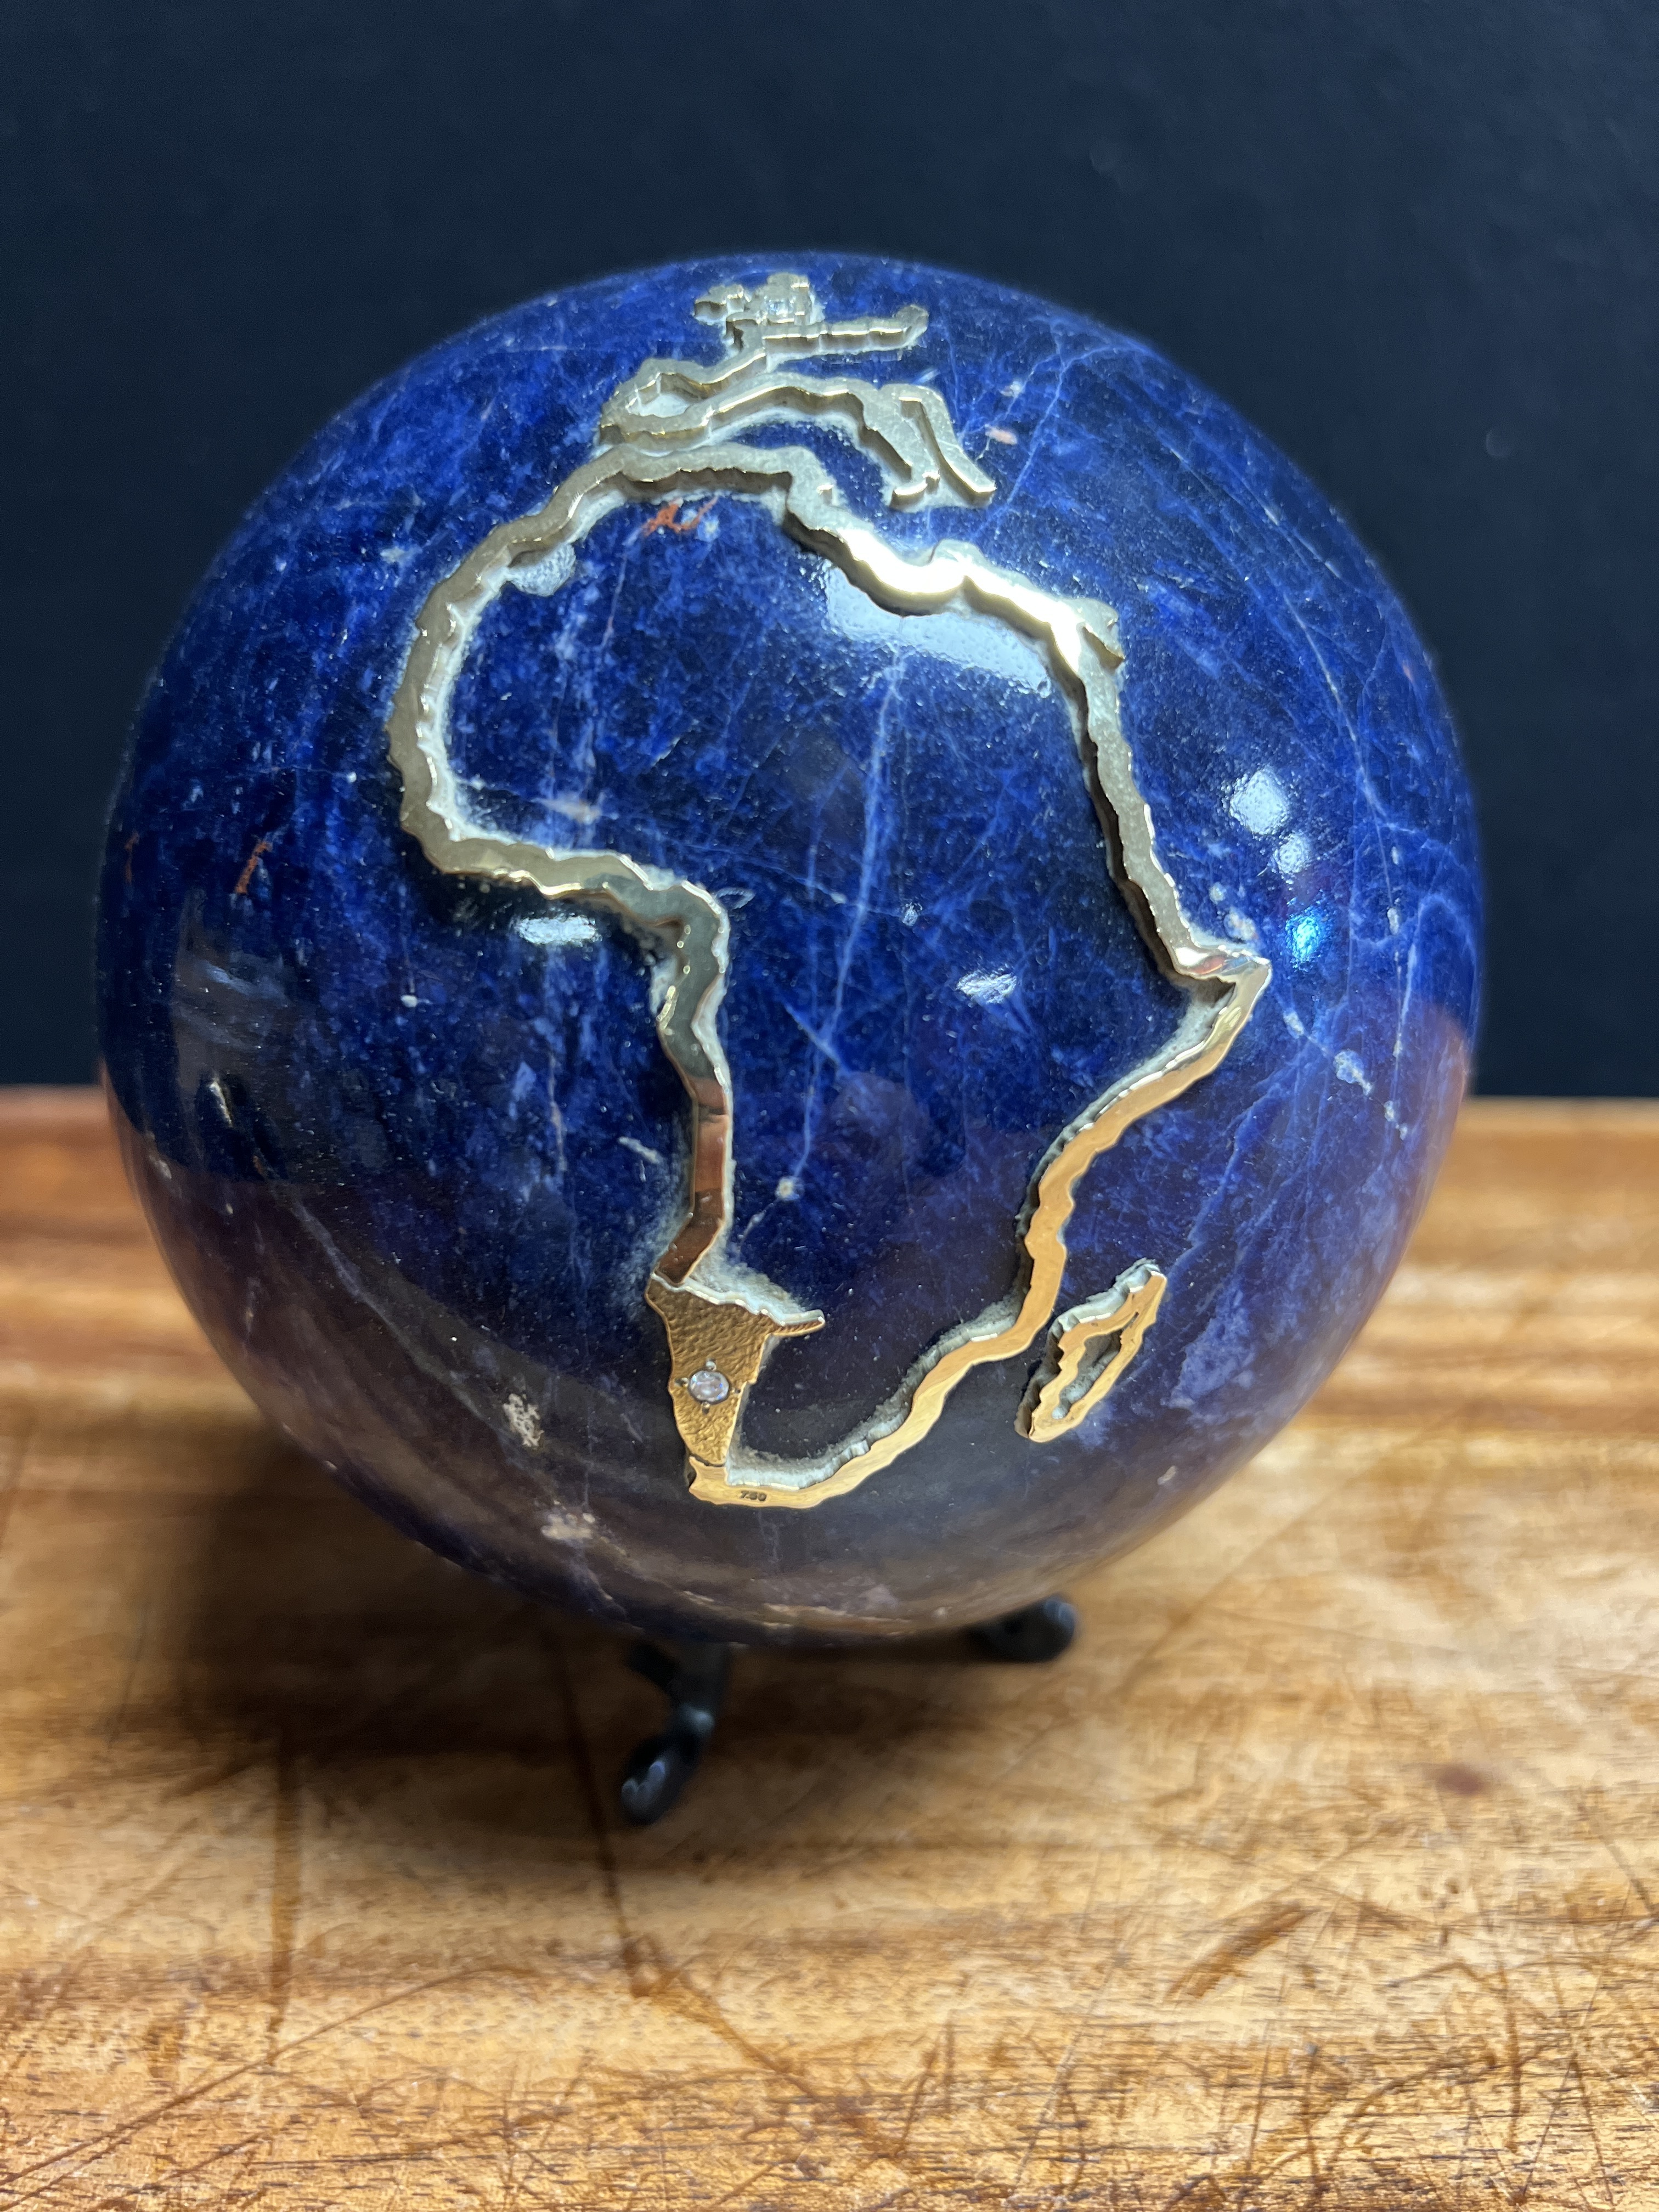 A LARGE LAPIS LAZULI SPHERE DEPICTING AN APPLIED COUNTRY OUTLINED IN 18CT GOLD SET WITH TWO - Image 2 of 11